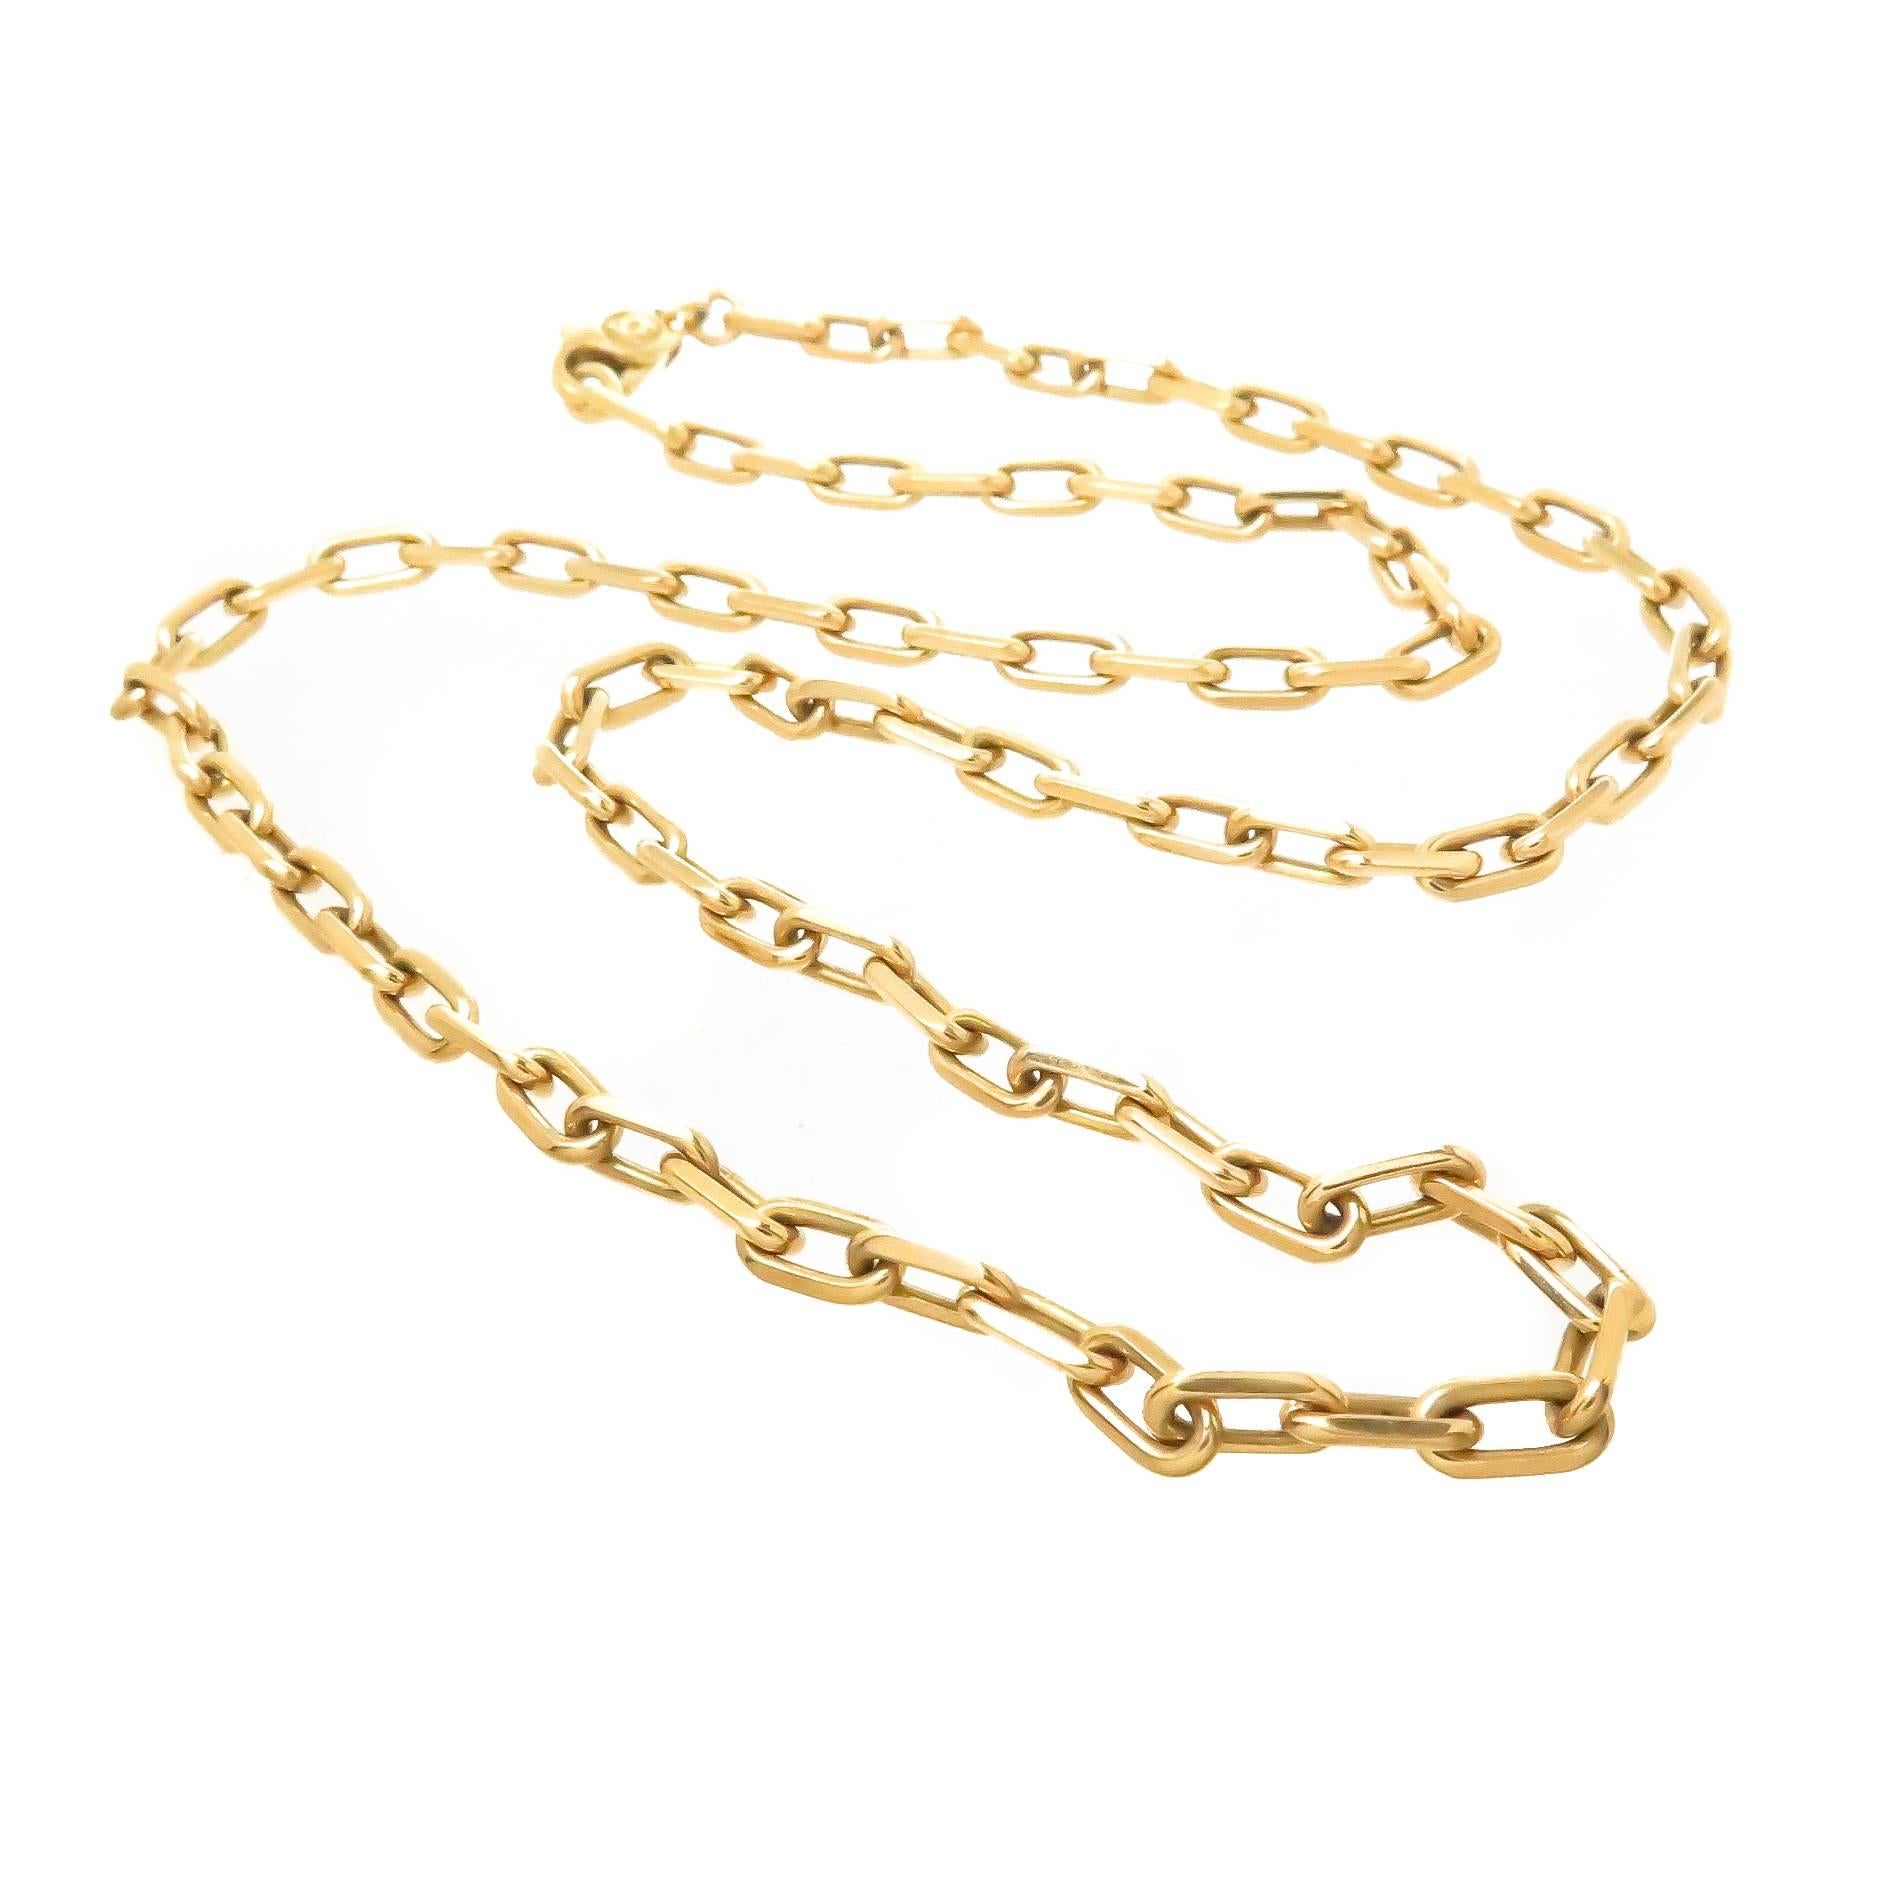 Circa 2000 Cartier 18K Yellow Gold Link Chain, measuring 20 inches in length, 1/8 inch wide and having Rectangular Links with a secure Lobster Claw lock. Signed and Numbered. 